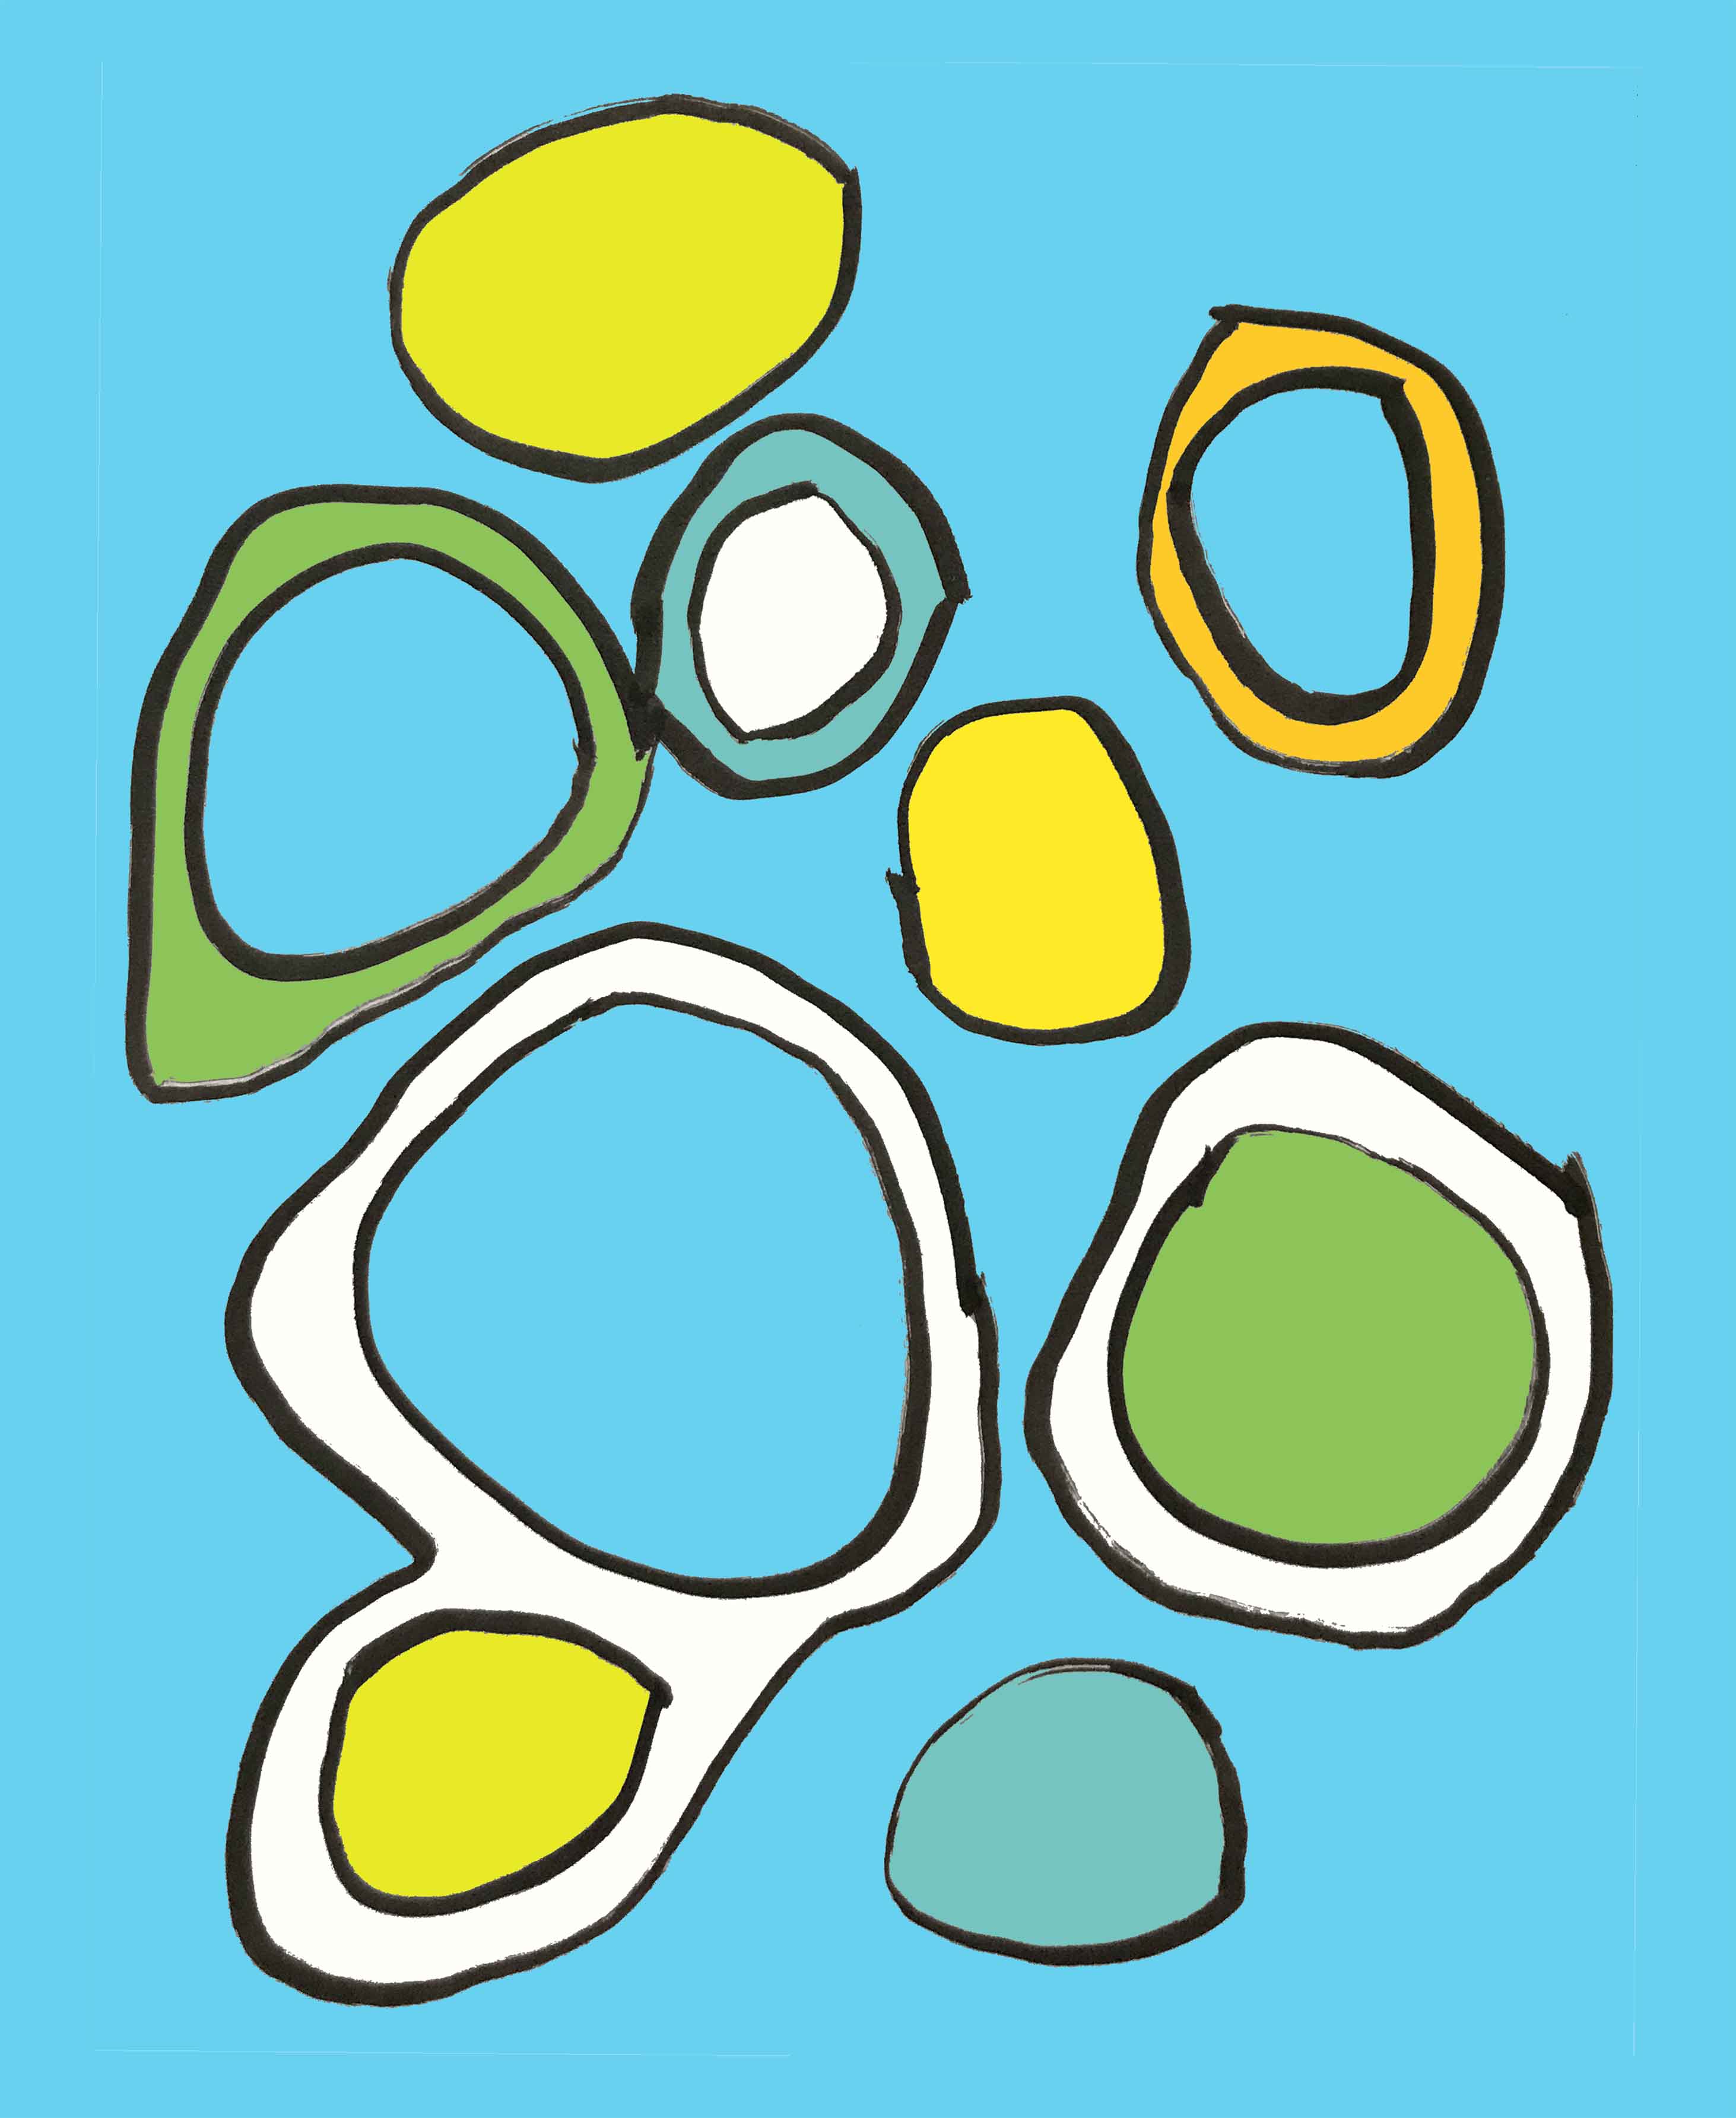 art every day number 226 / doodle / eggs & lemon